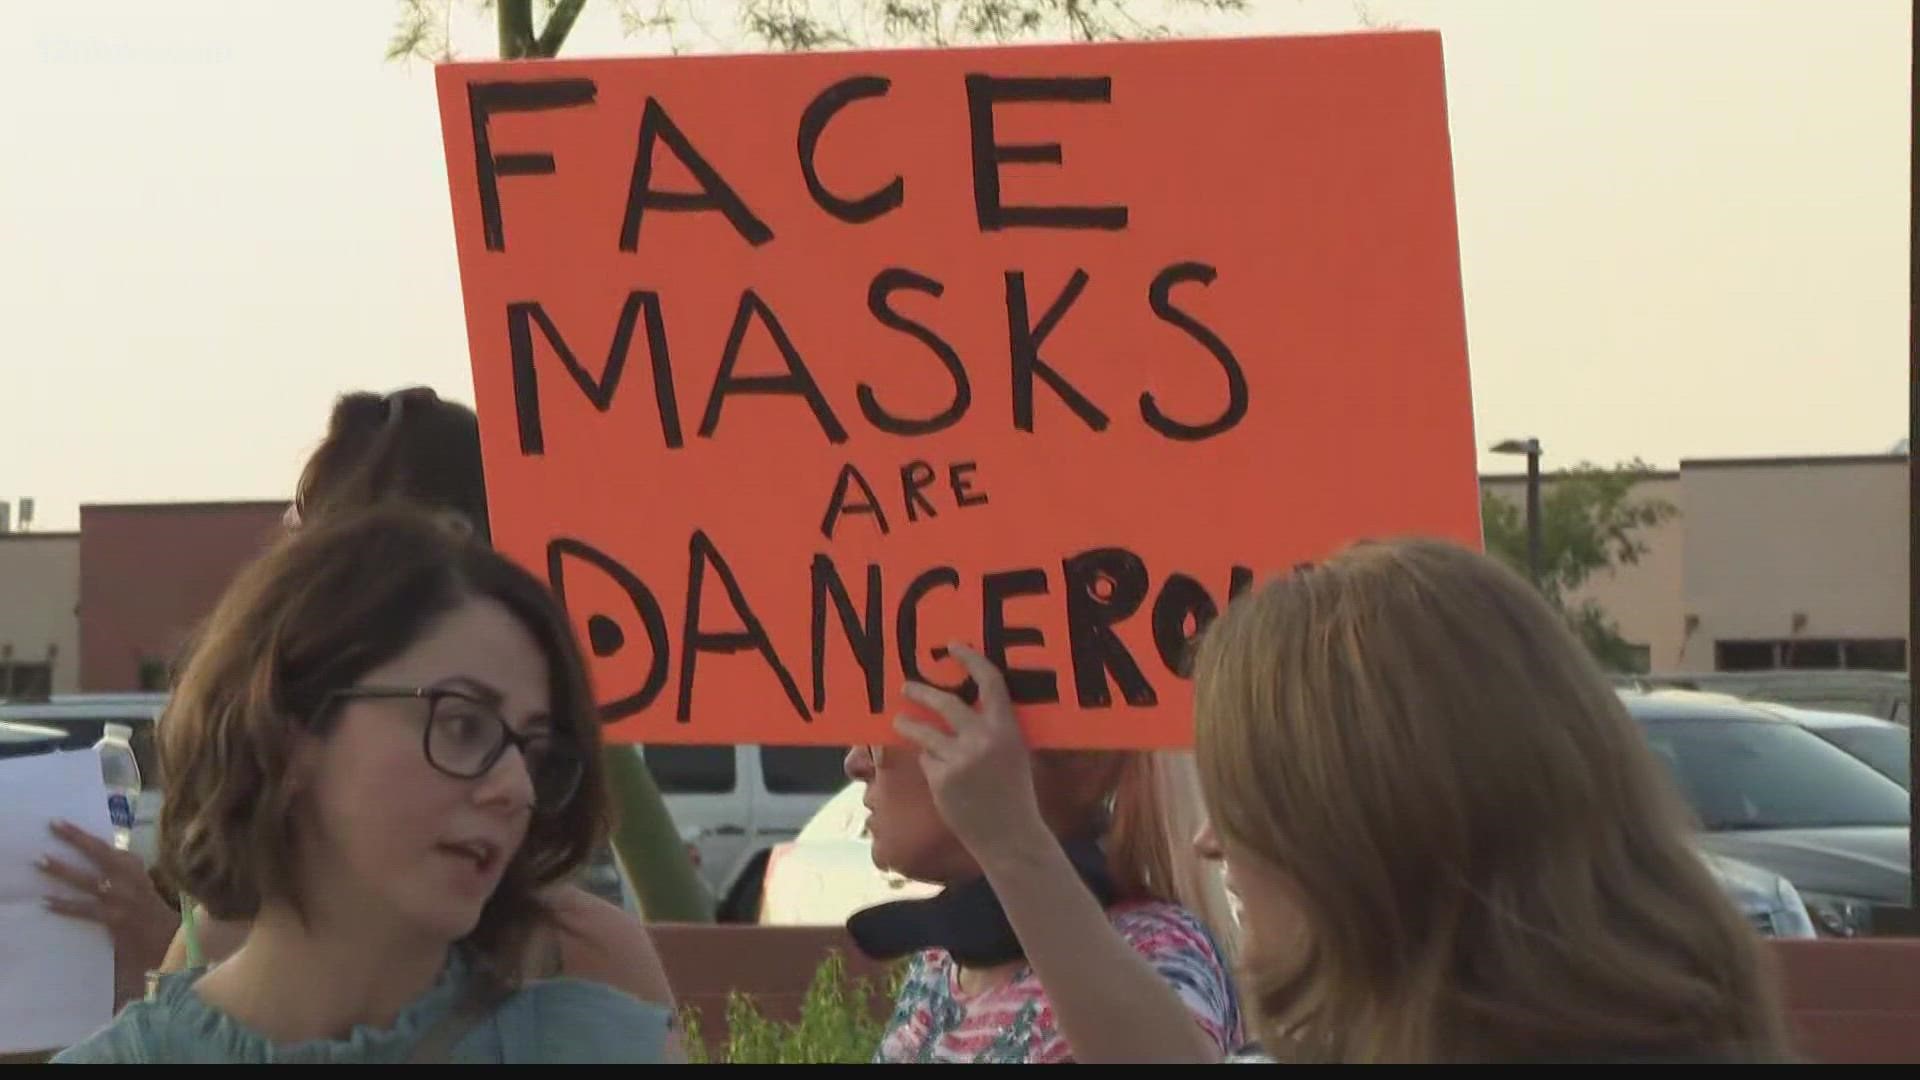 The battle over banning face mask requirements for school children is now moving from the classroom to the courtroom. A ruling is expected before September 29.